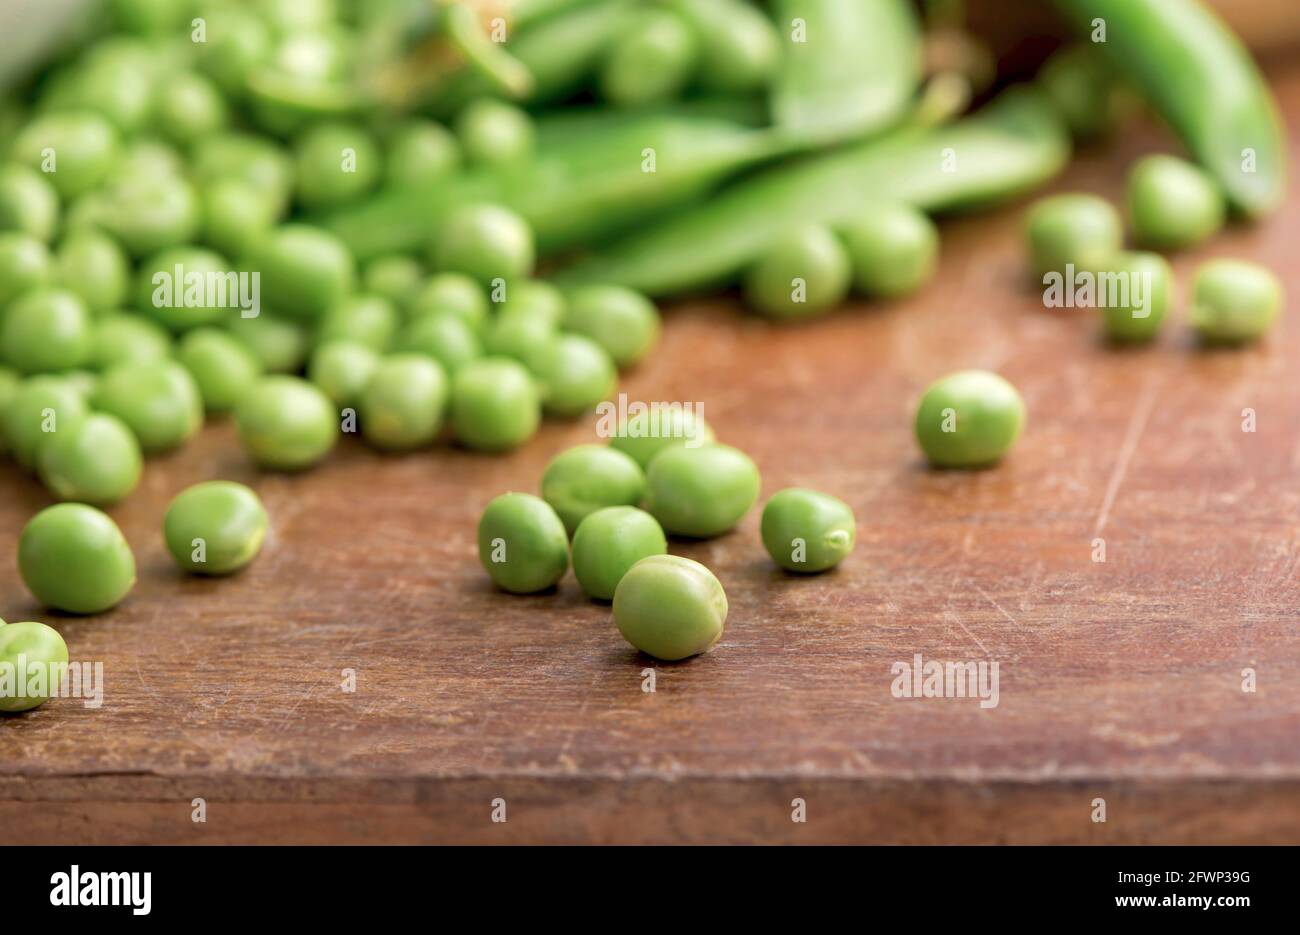 Green pea on rustic wooden background with copy space, natural wooden table. Stock Photo